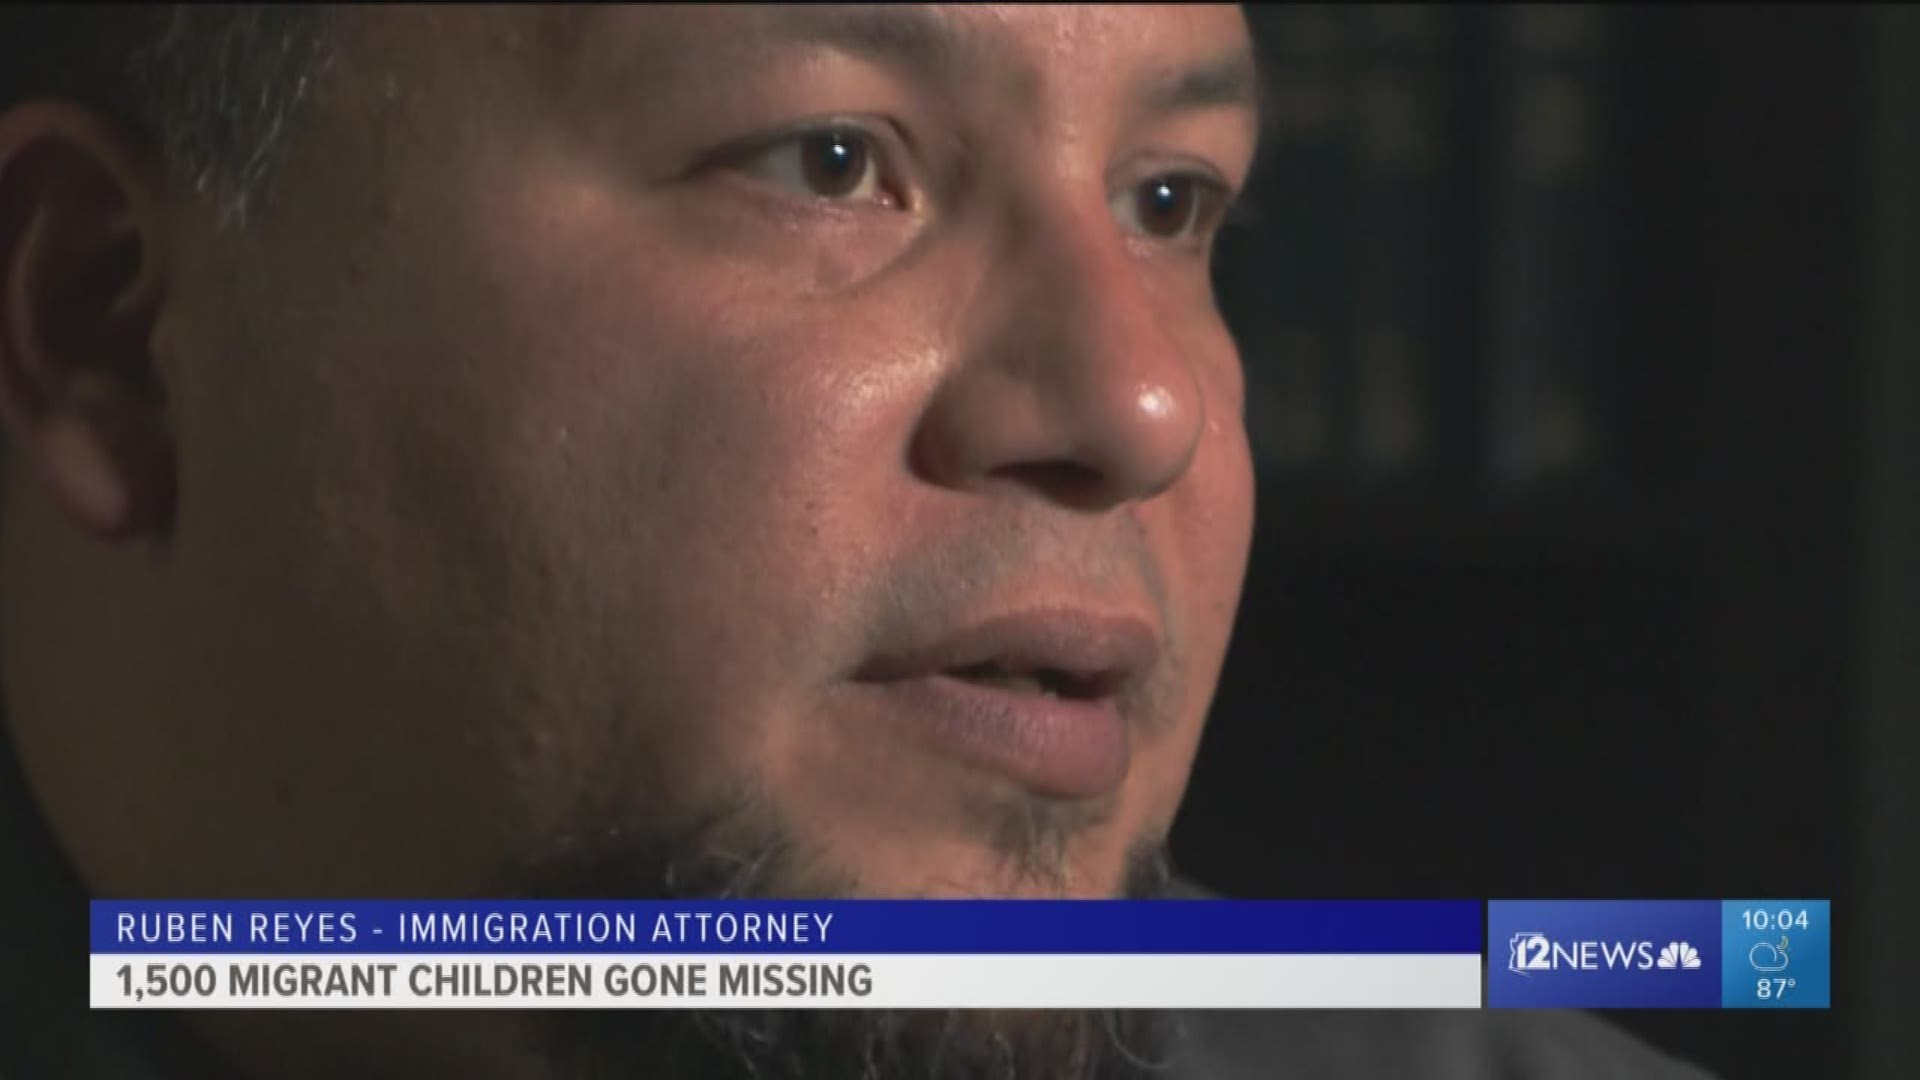 An immigration attorney says he is not surprised there are missing children, but he is shocked by the number.